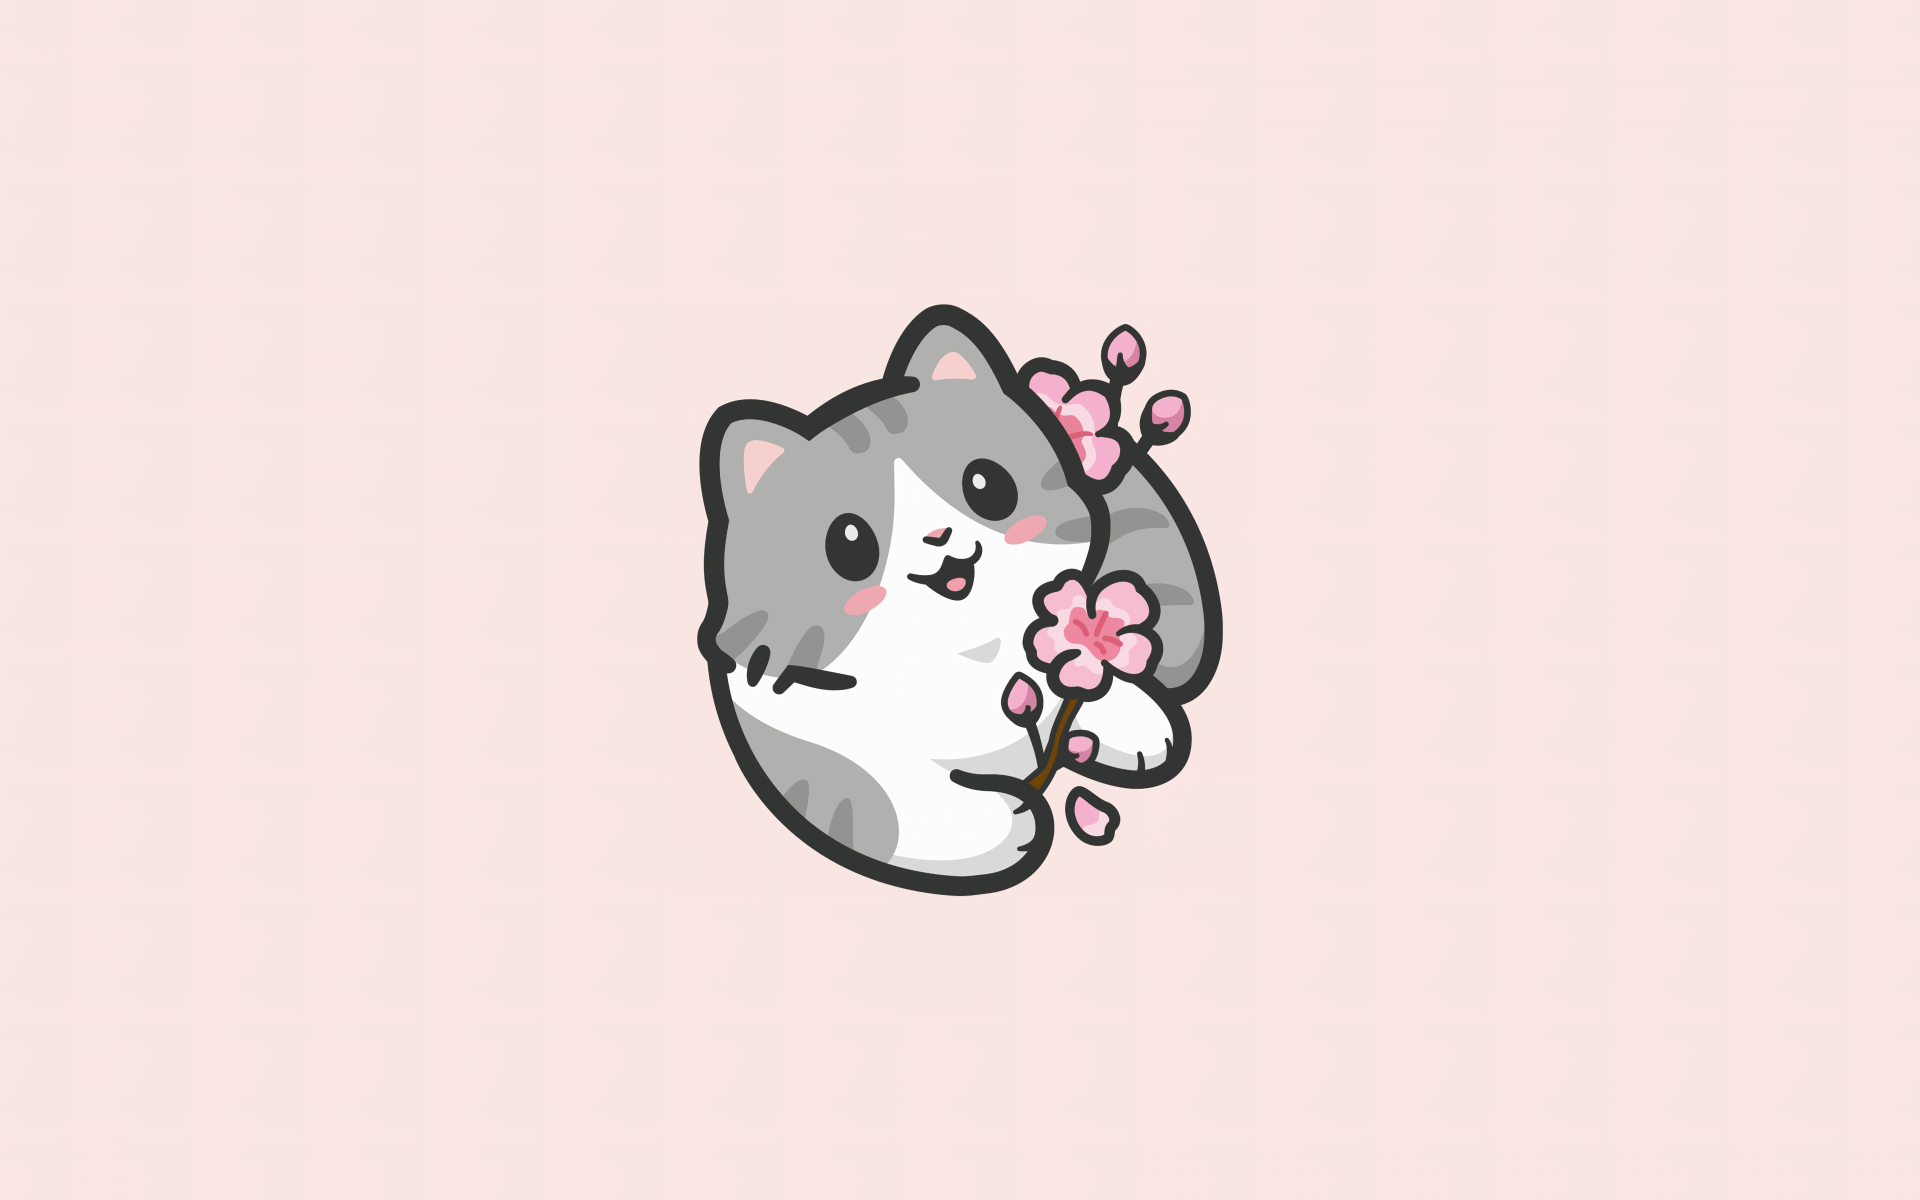 A white and grey cat holding a pink flower - Cute